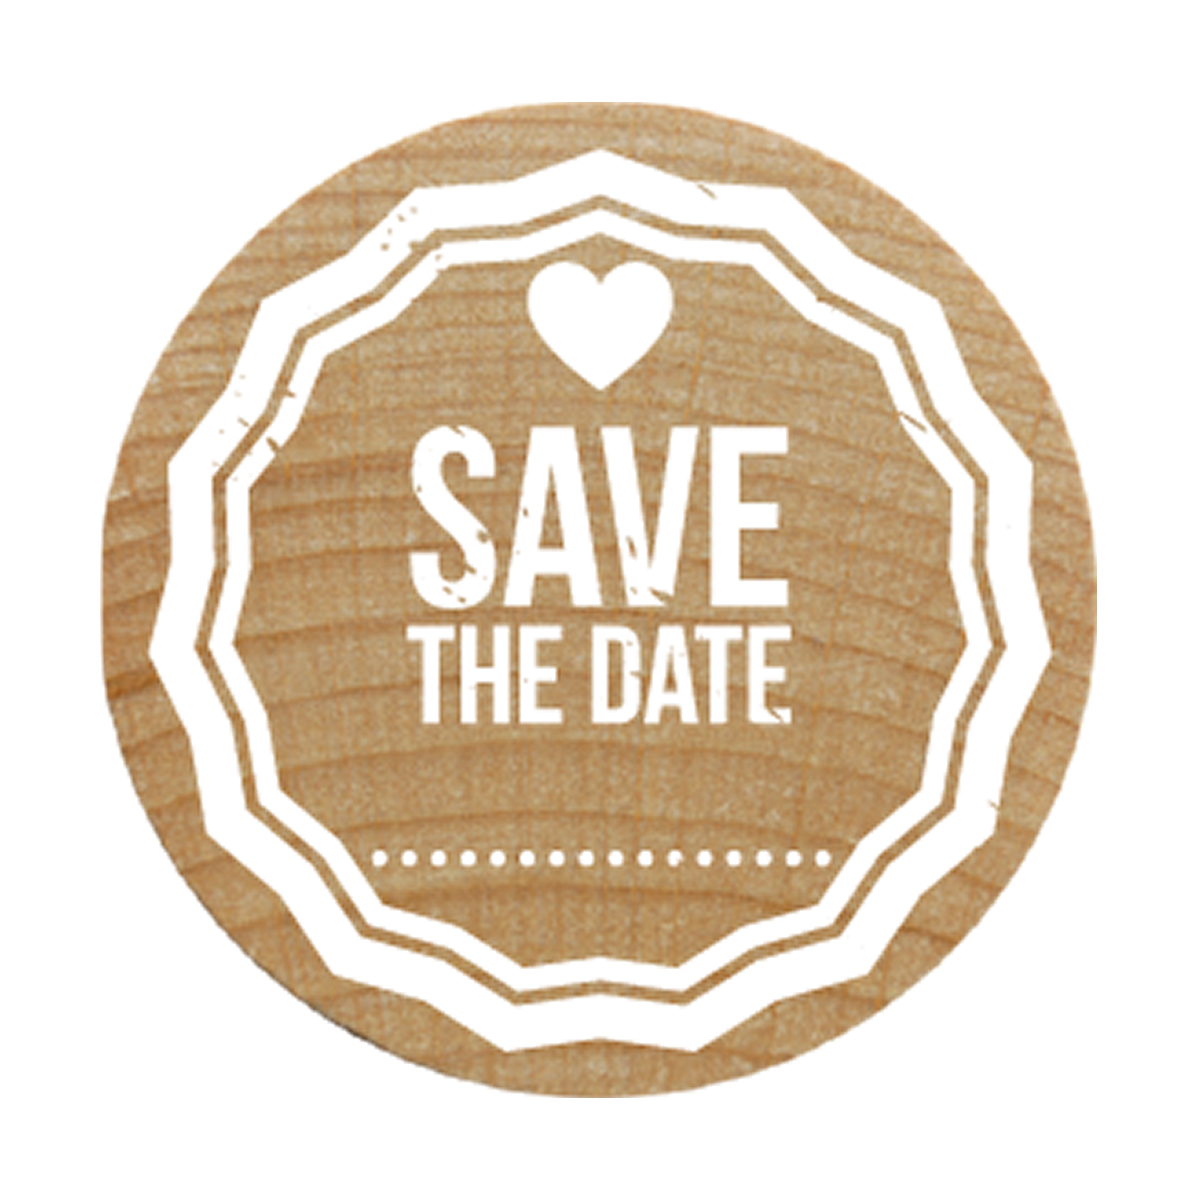 COLOPCOLOP Arts & Crafts Woodies Ξύλινη Σφραγίδα - Save the date